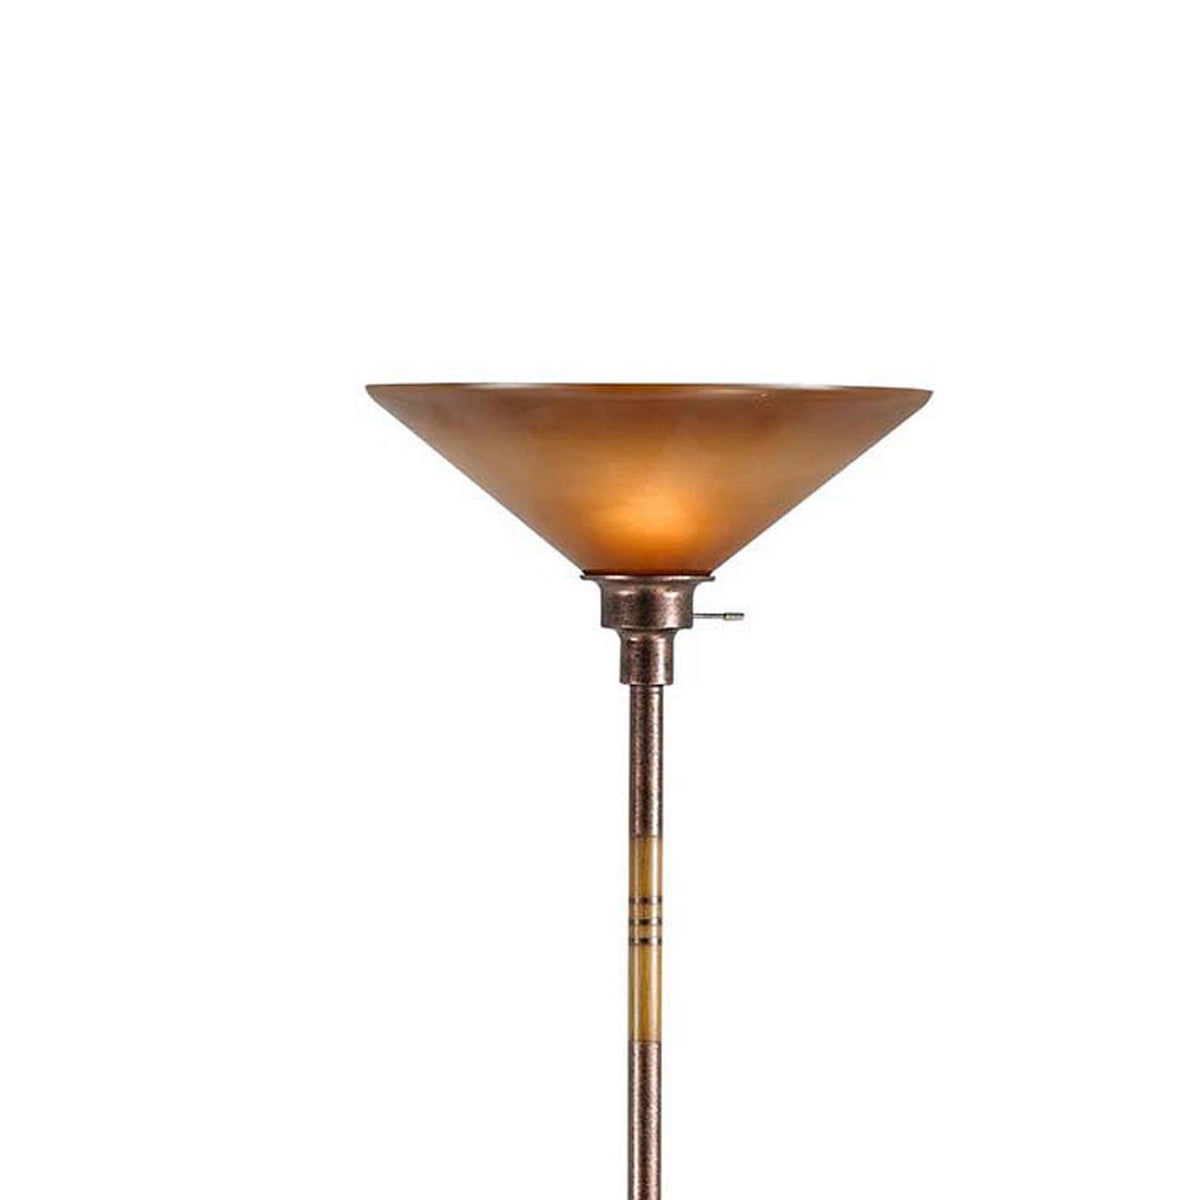 3 Way Torchiere Floor Lamp with Frosted Glass shade and Stable Base, Bronze - BM220832